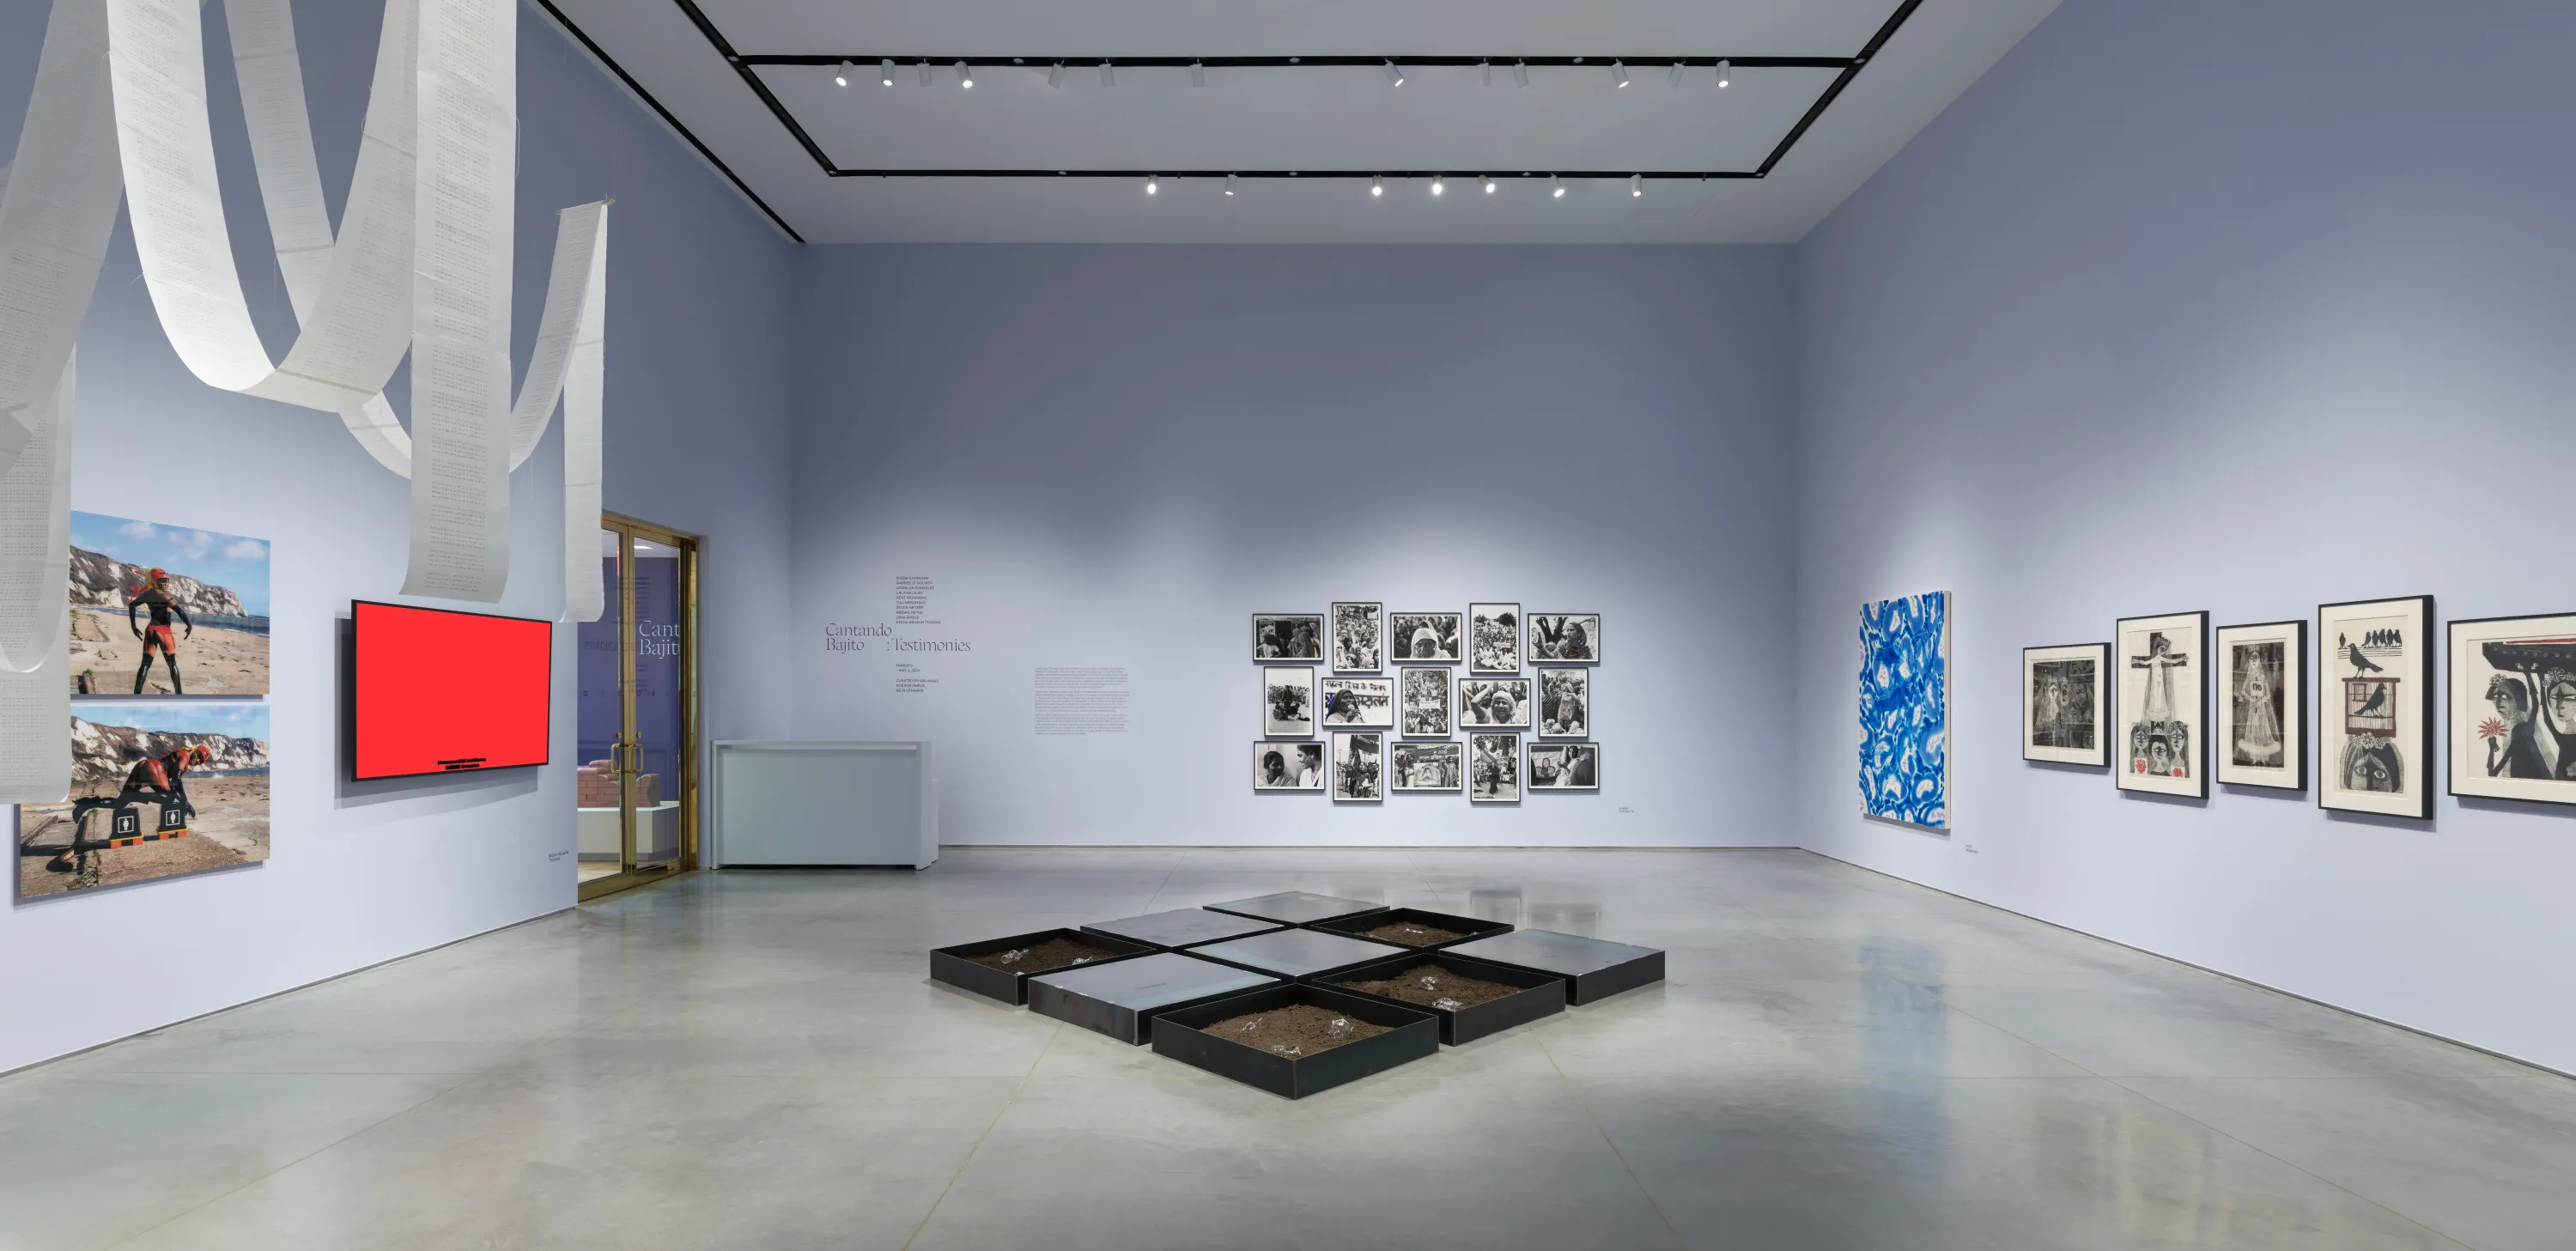 Gallery interior with light lavender walls and a gray floor. There are several artworks displayed including paintings, etchings, and photographs mounted on the wall and a hanging white paper ribbon installation, and steel tray installation on the floor.